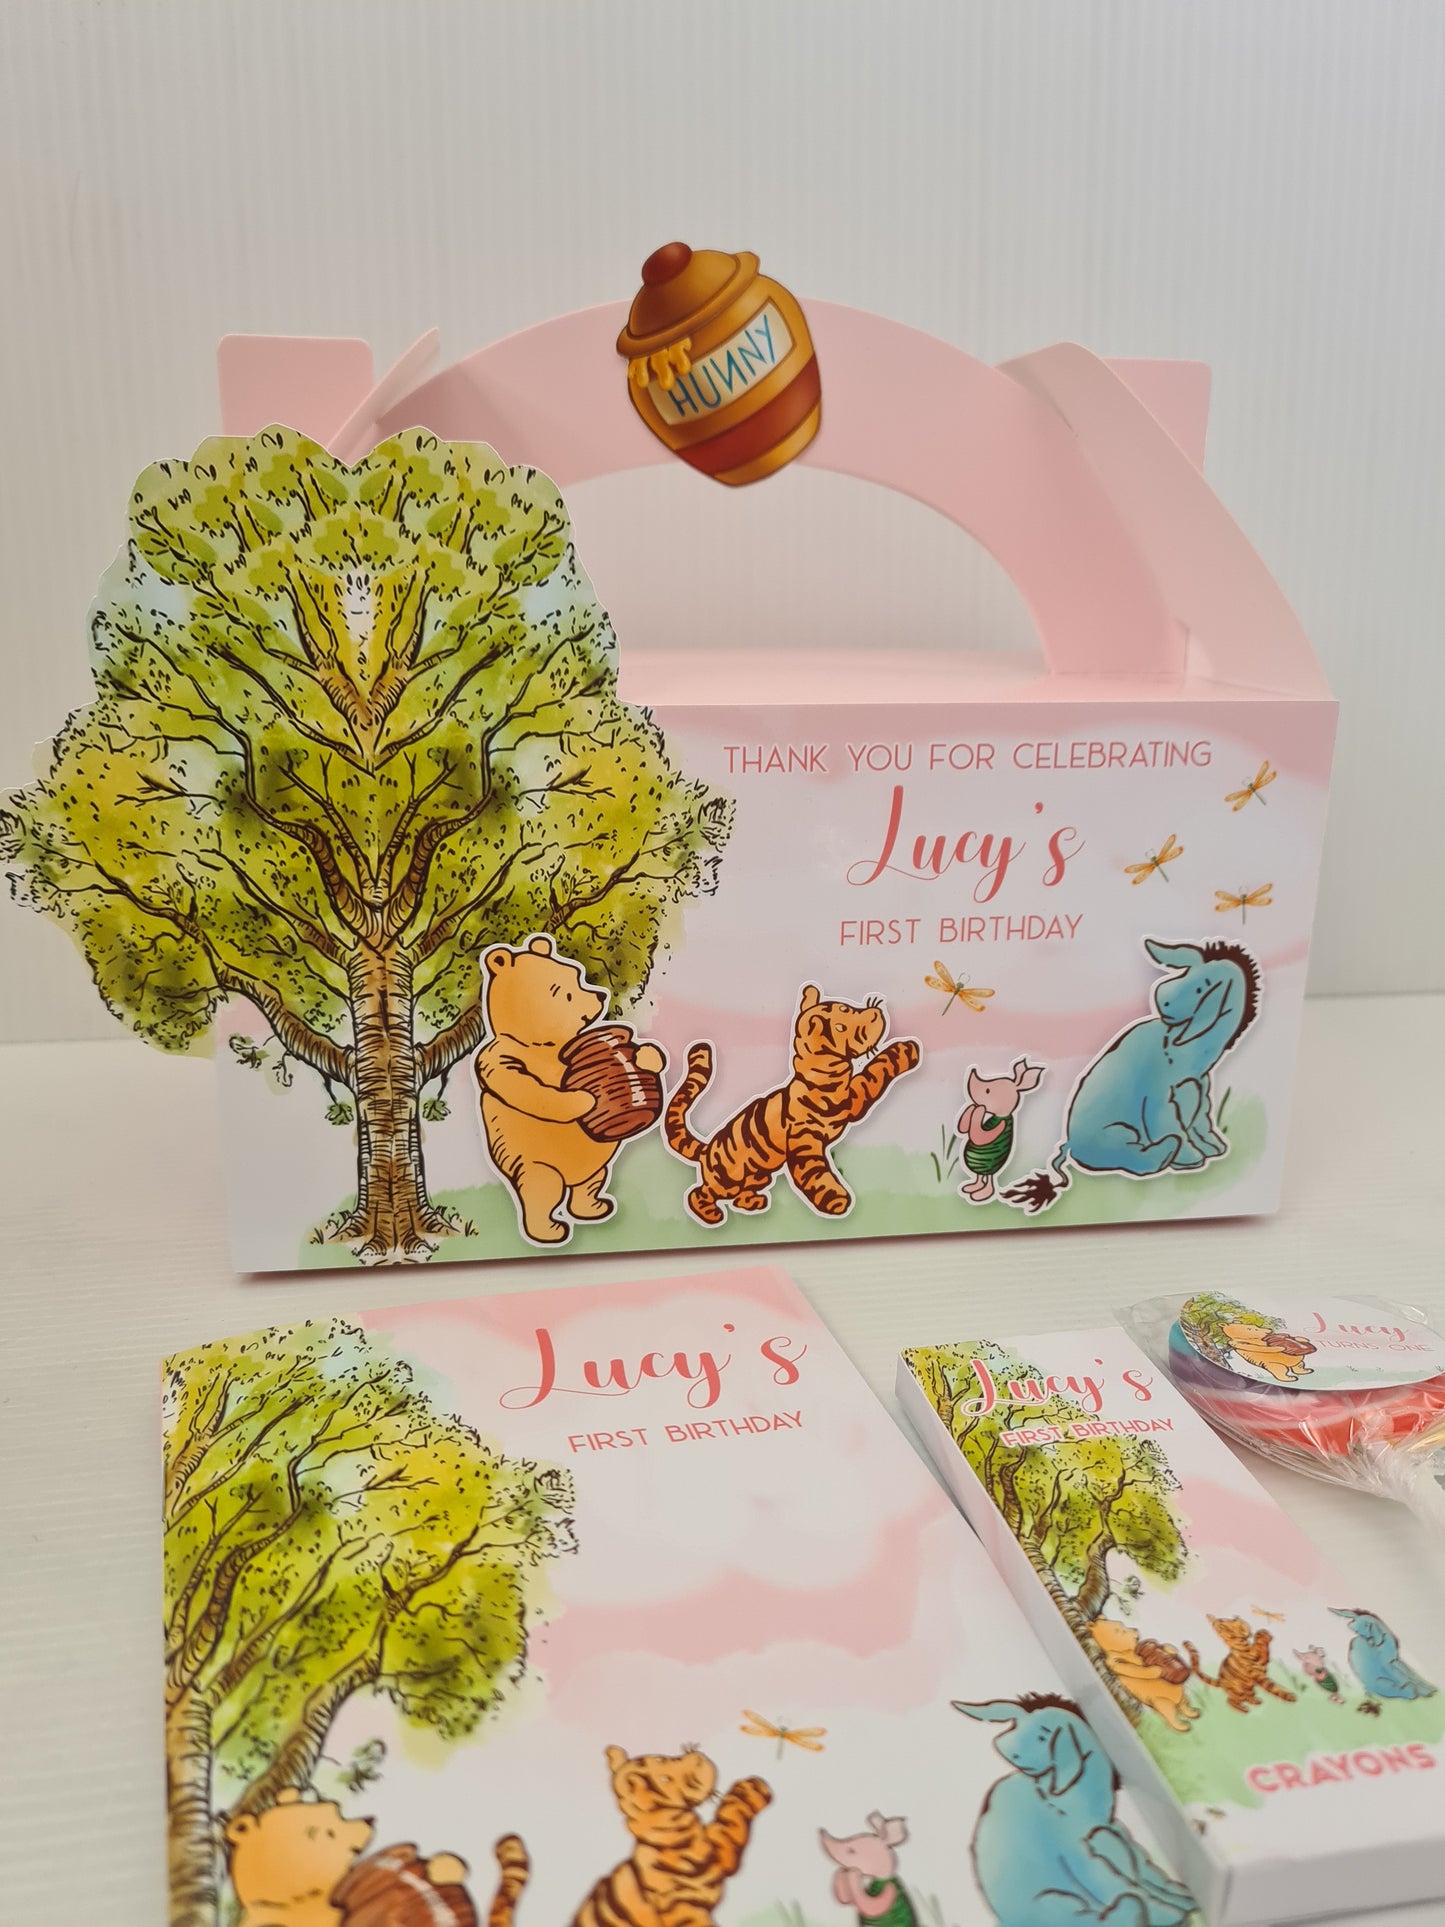 Winnie the Pooh Classic Pink Party Box